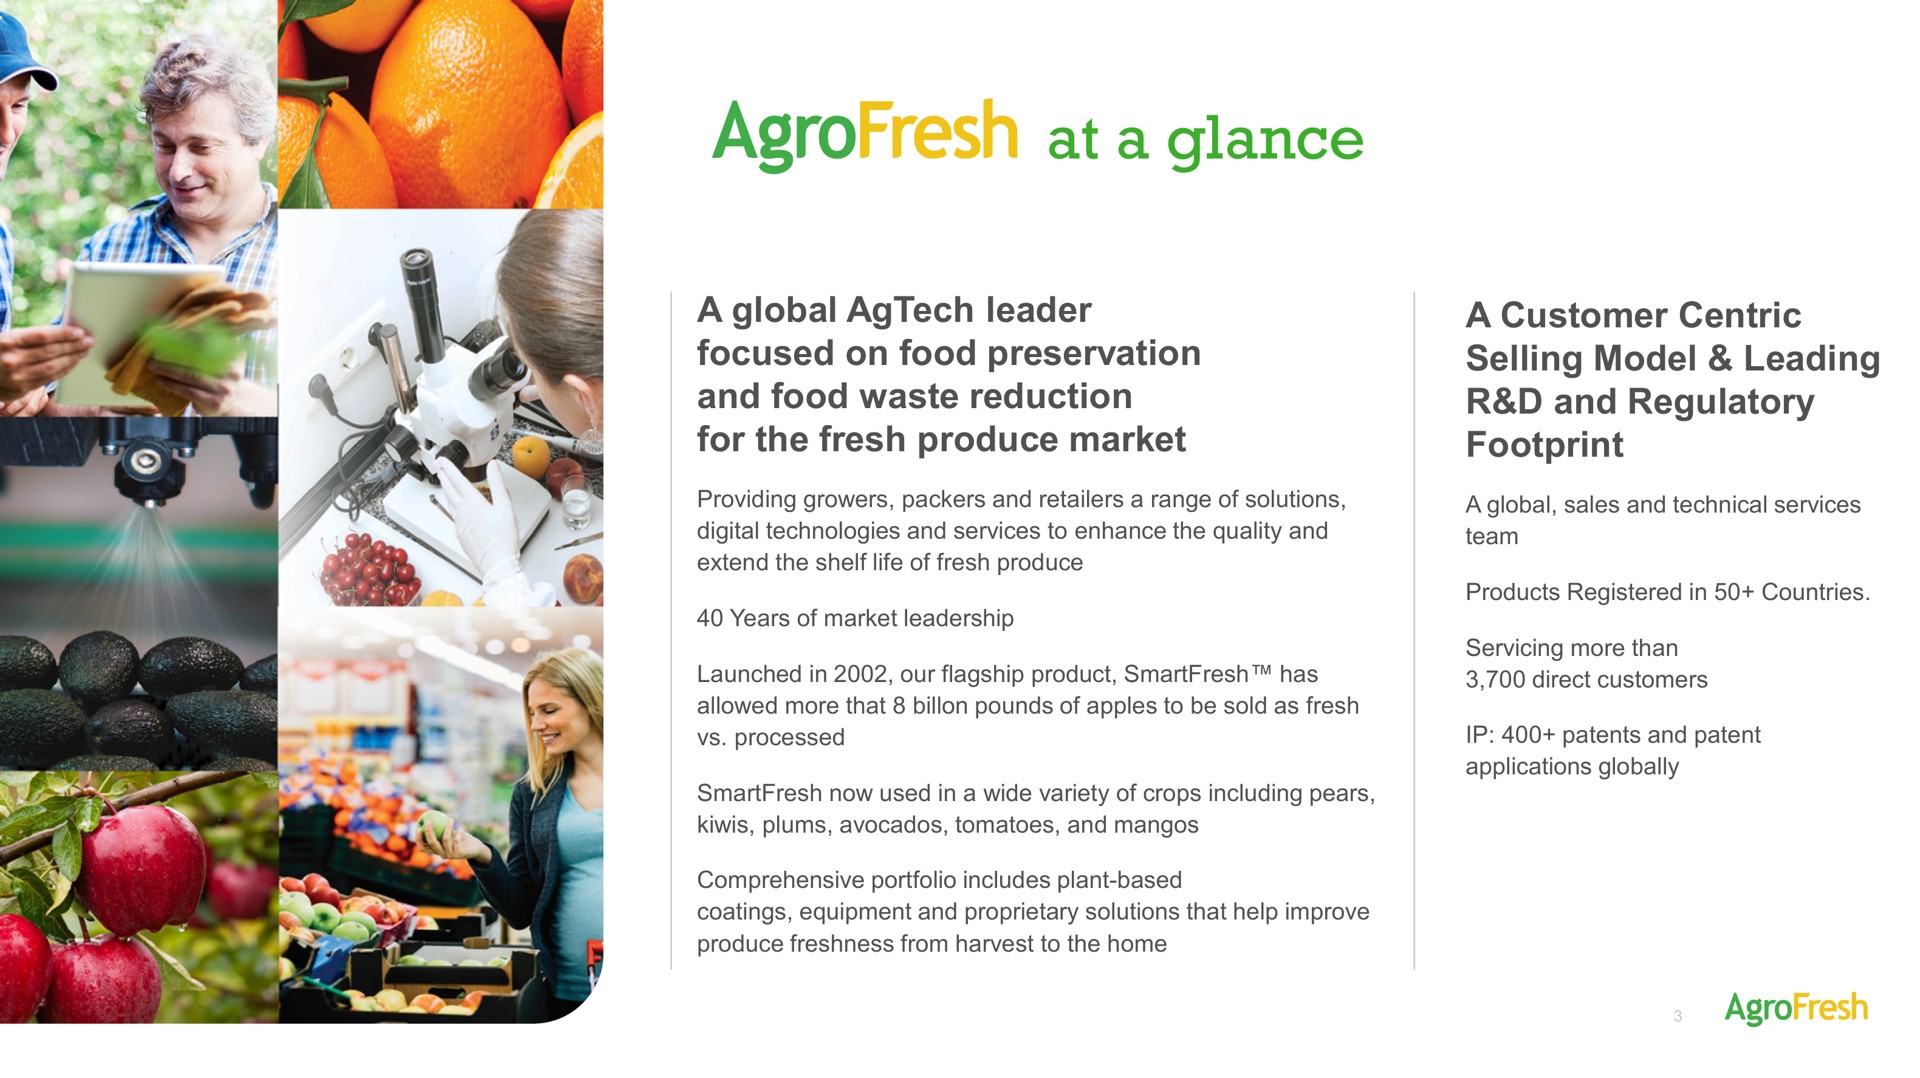 at a glance a global leader focused on food preservation and food waste reduction for the fresh produce market a customer centric selling model leading and regulatory footprint | AgroFresh